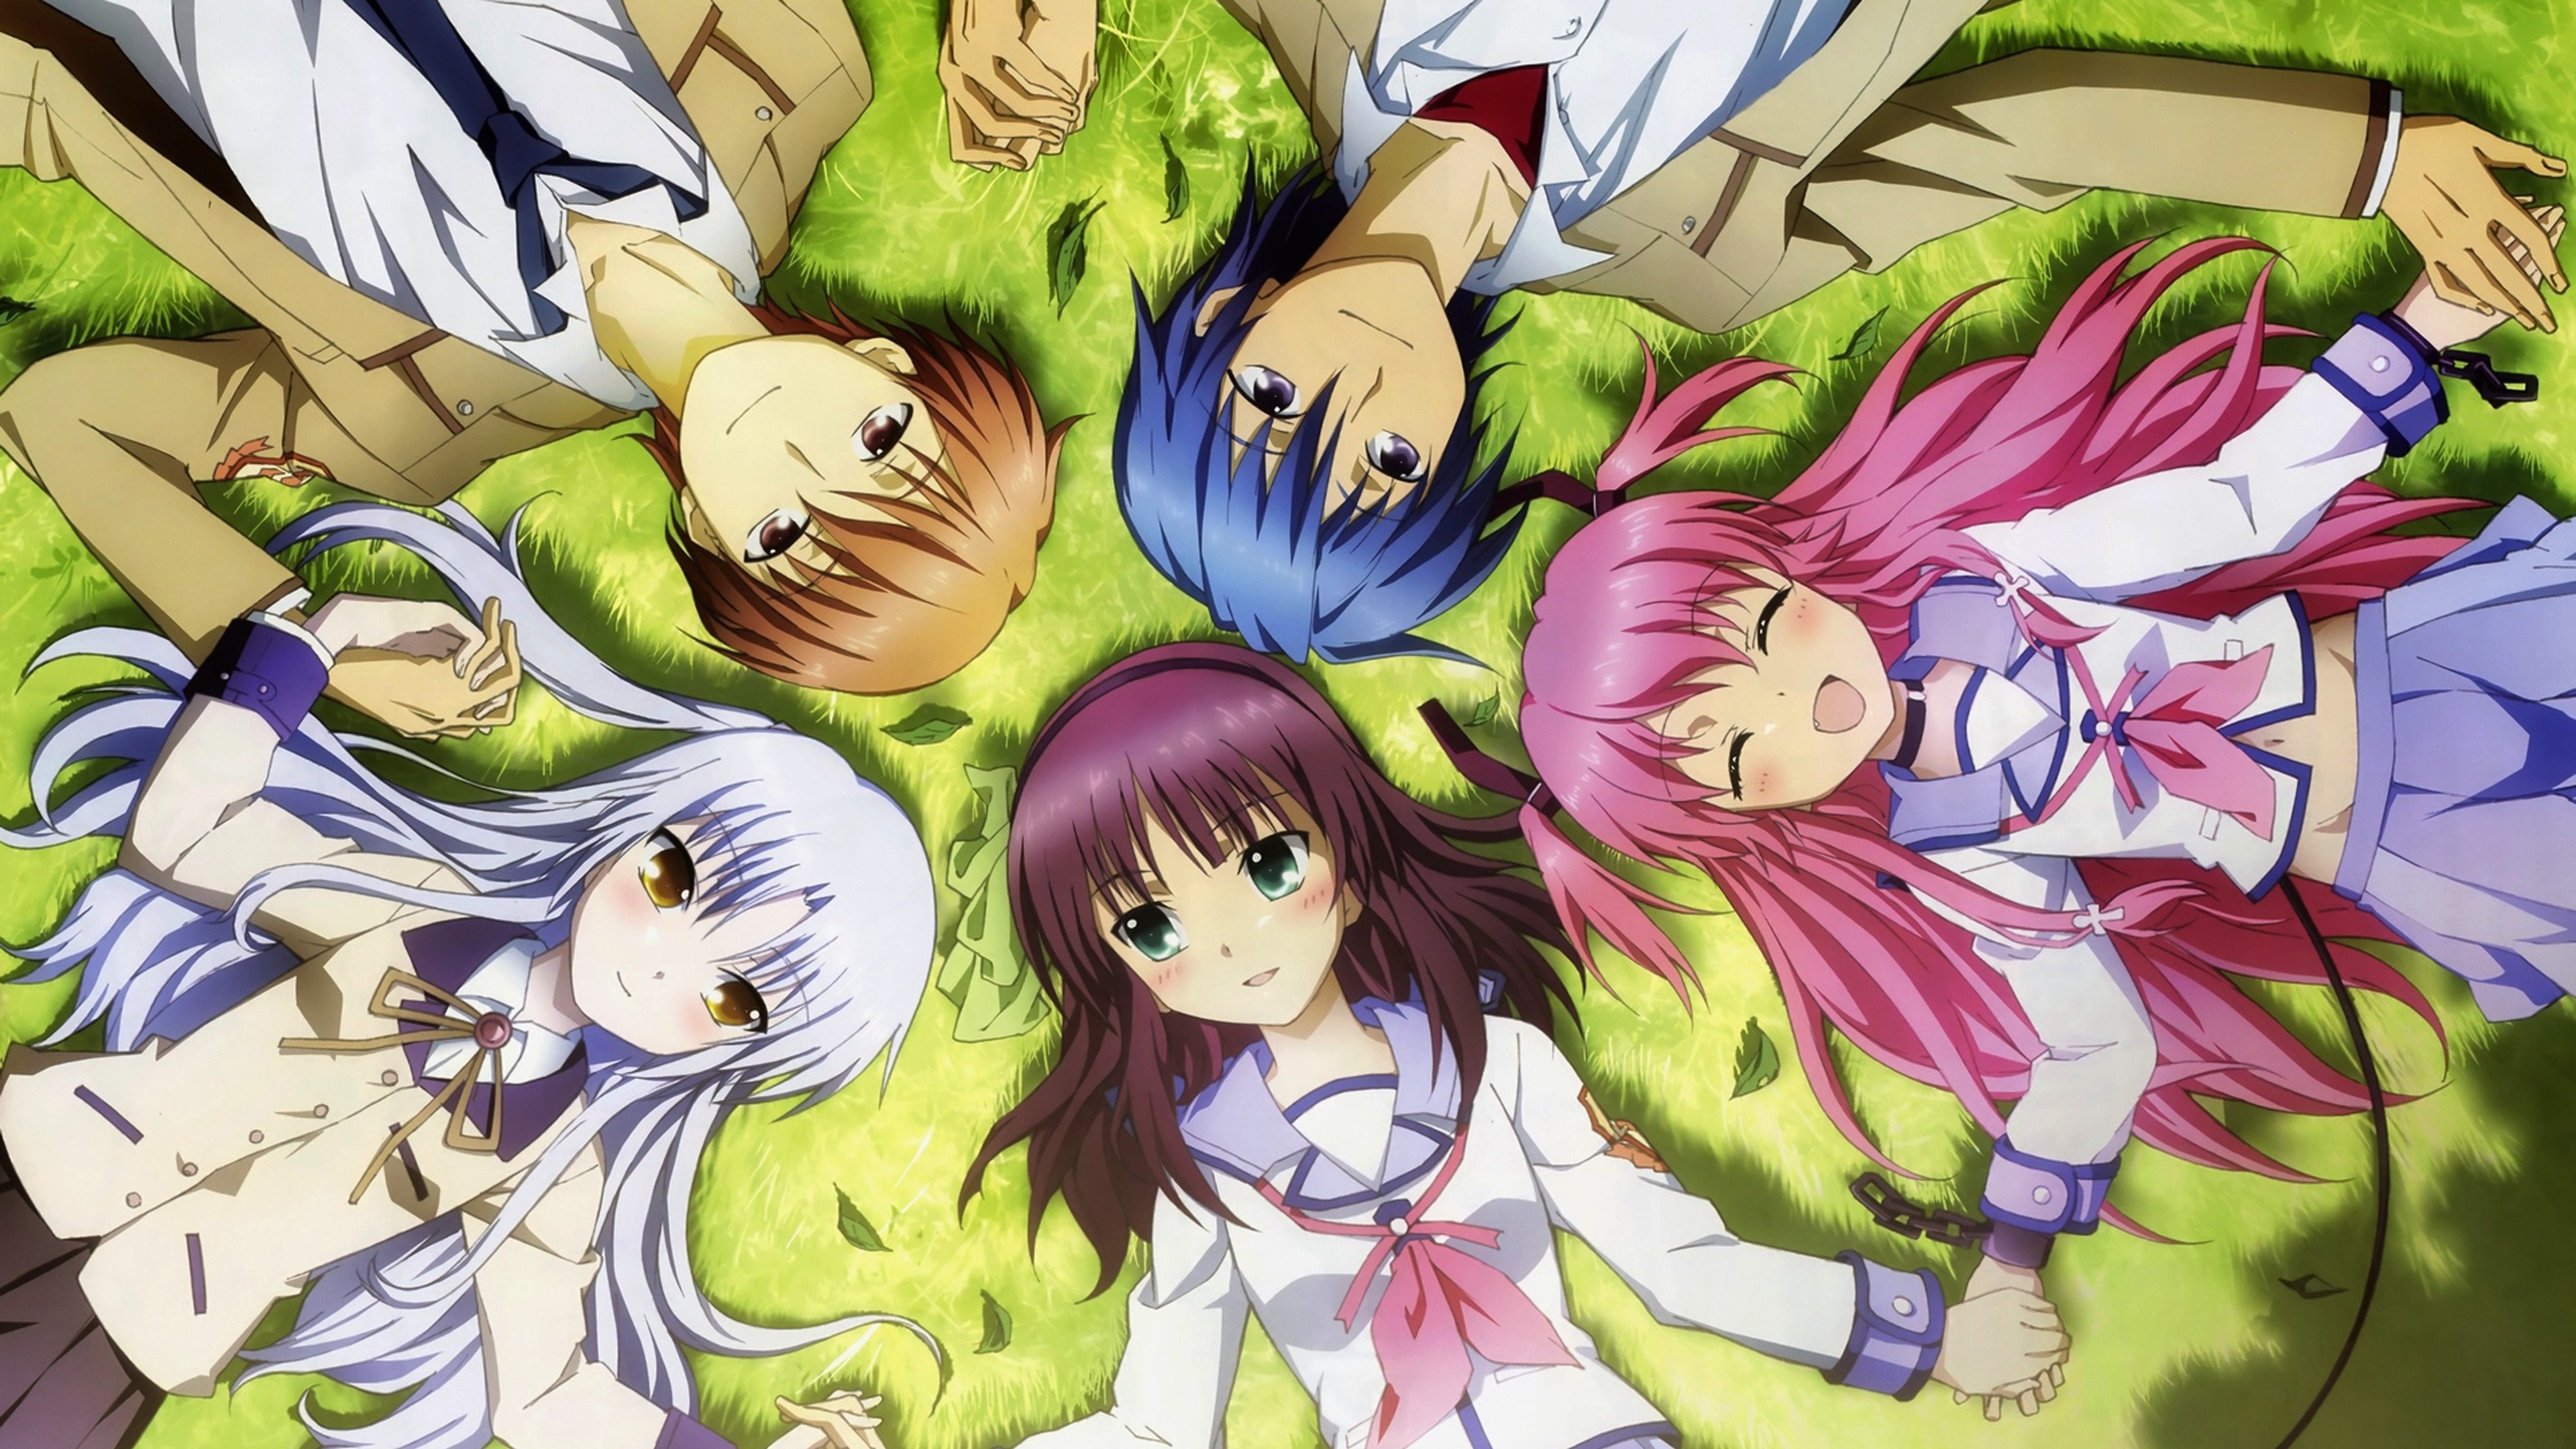 Angel Beats! (Anime): Kawaii, Ranking highly on the "most heartbreaking anime" lists. 3840x2160 4K Background.